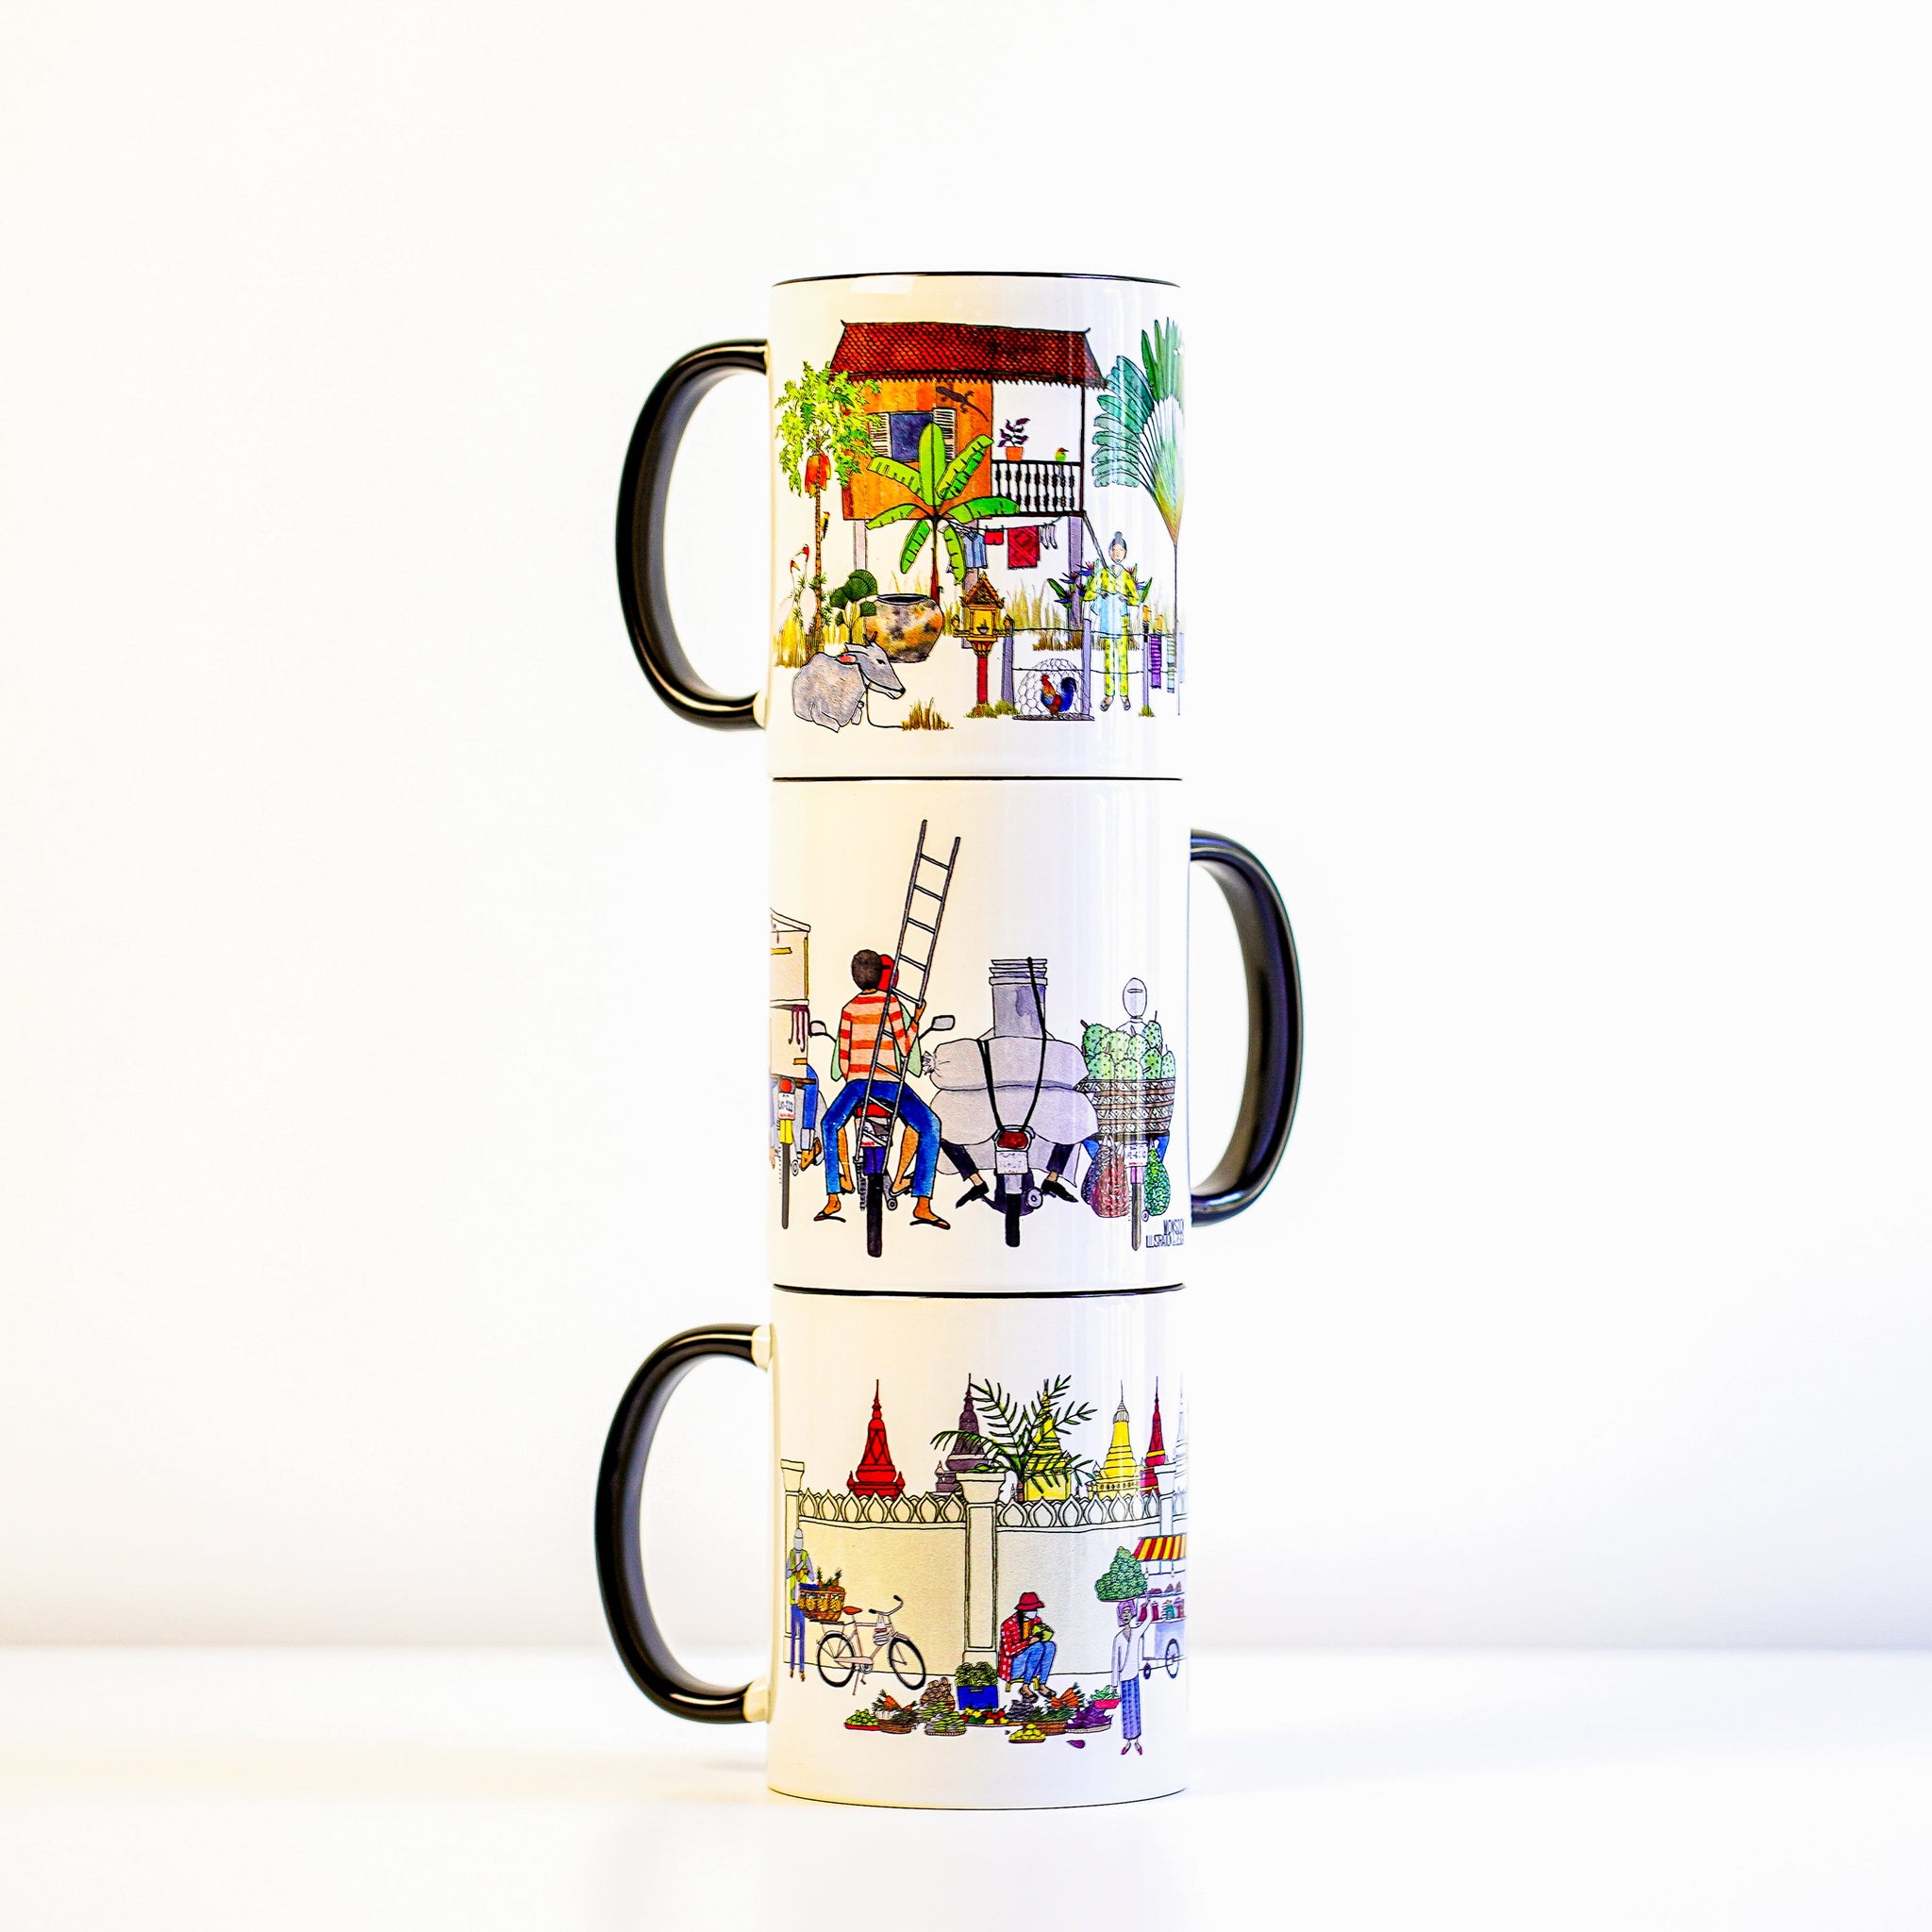 Drink your coffee or tea in style with our mugs. Each mug is designed with an eye-catching illustration that truly depicts everyday life of Cambodia. Its rainbow-colored theme will bring joy to your day.